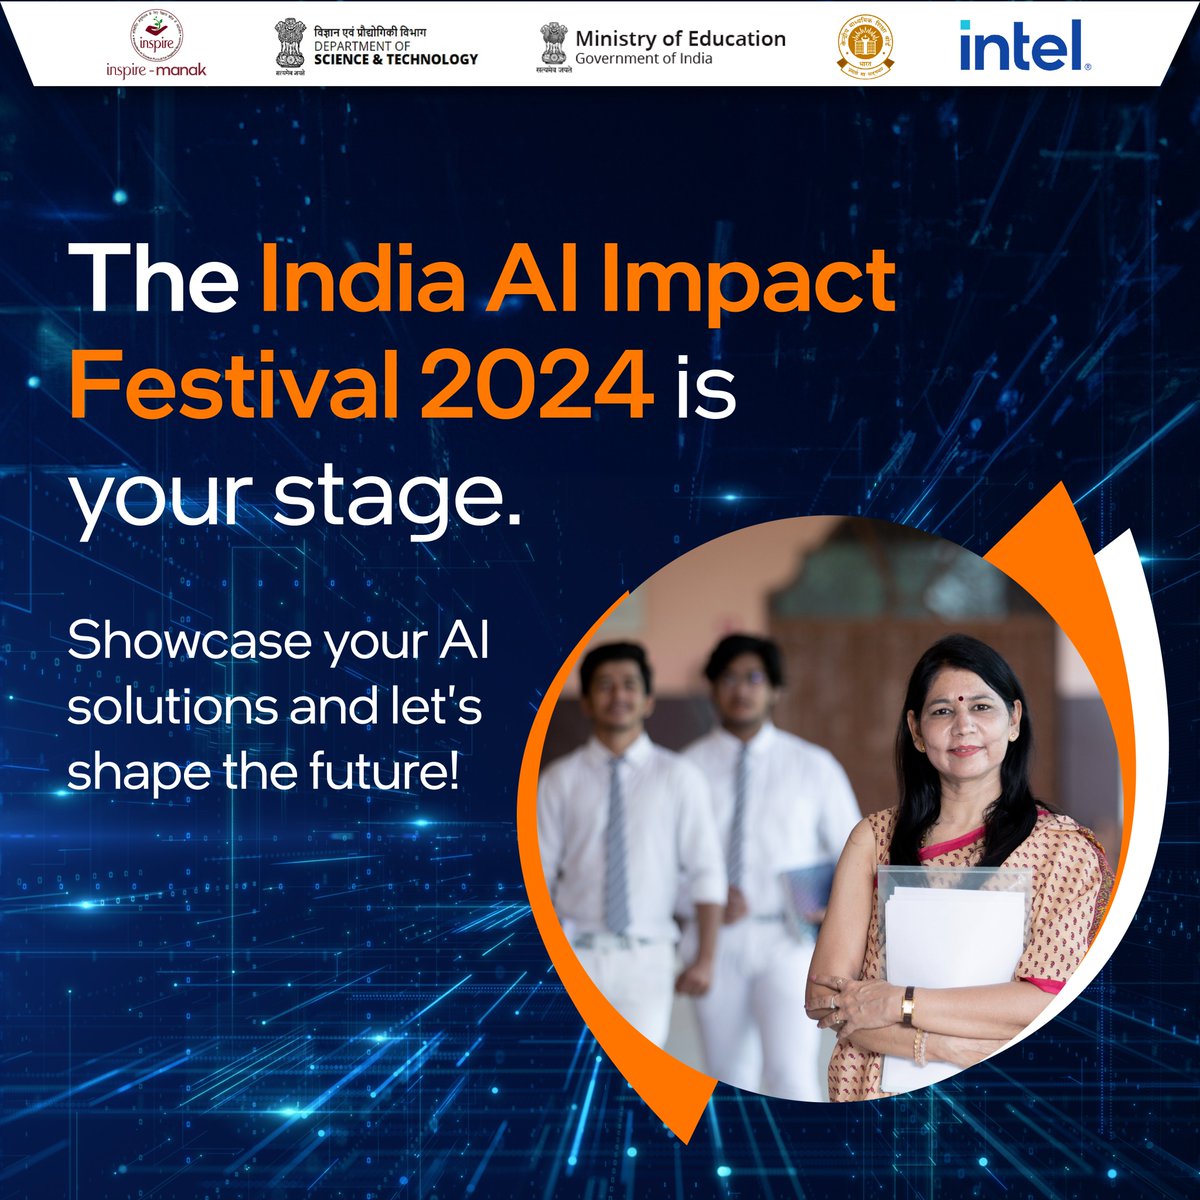 Know a friend who's building cool tech projects? Tag them below! The #IndiaAIImpactFestival 2024 is the place to turn those #AI ideas into real solutions, win some amazing prizes and mentorship opportunities in the process. Learn more - linktr.ee/IndiaAIImpactF…

#AI4Youth #AIoT